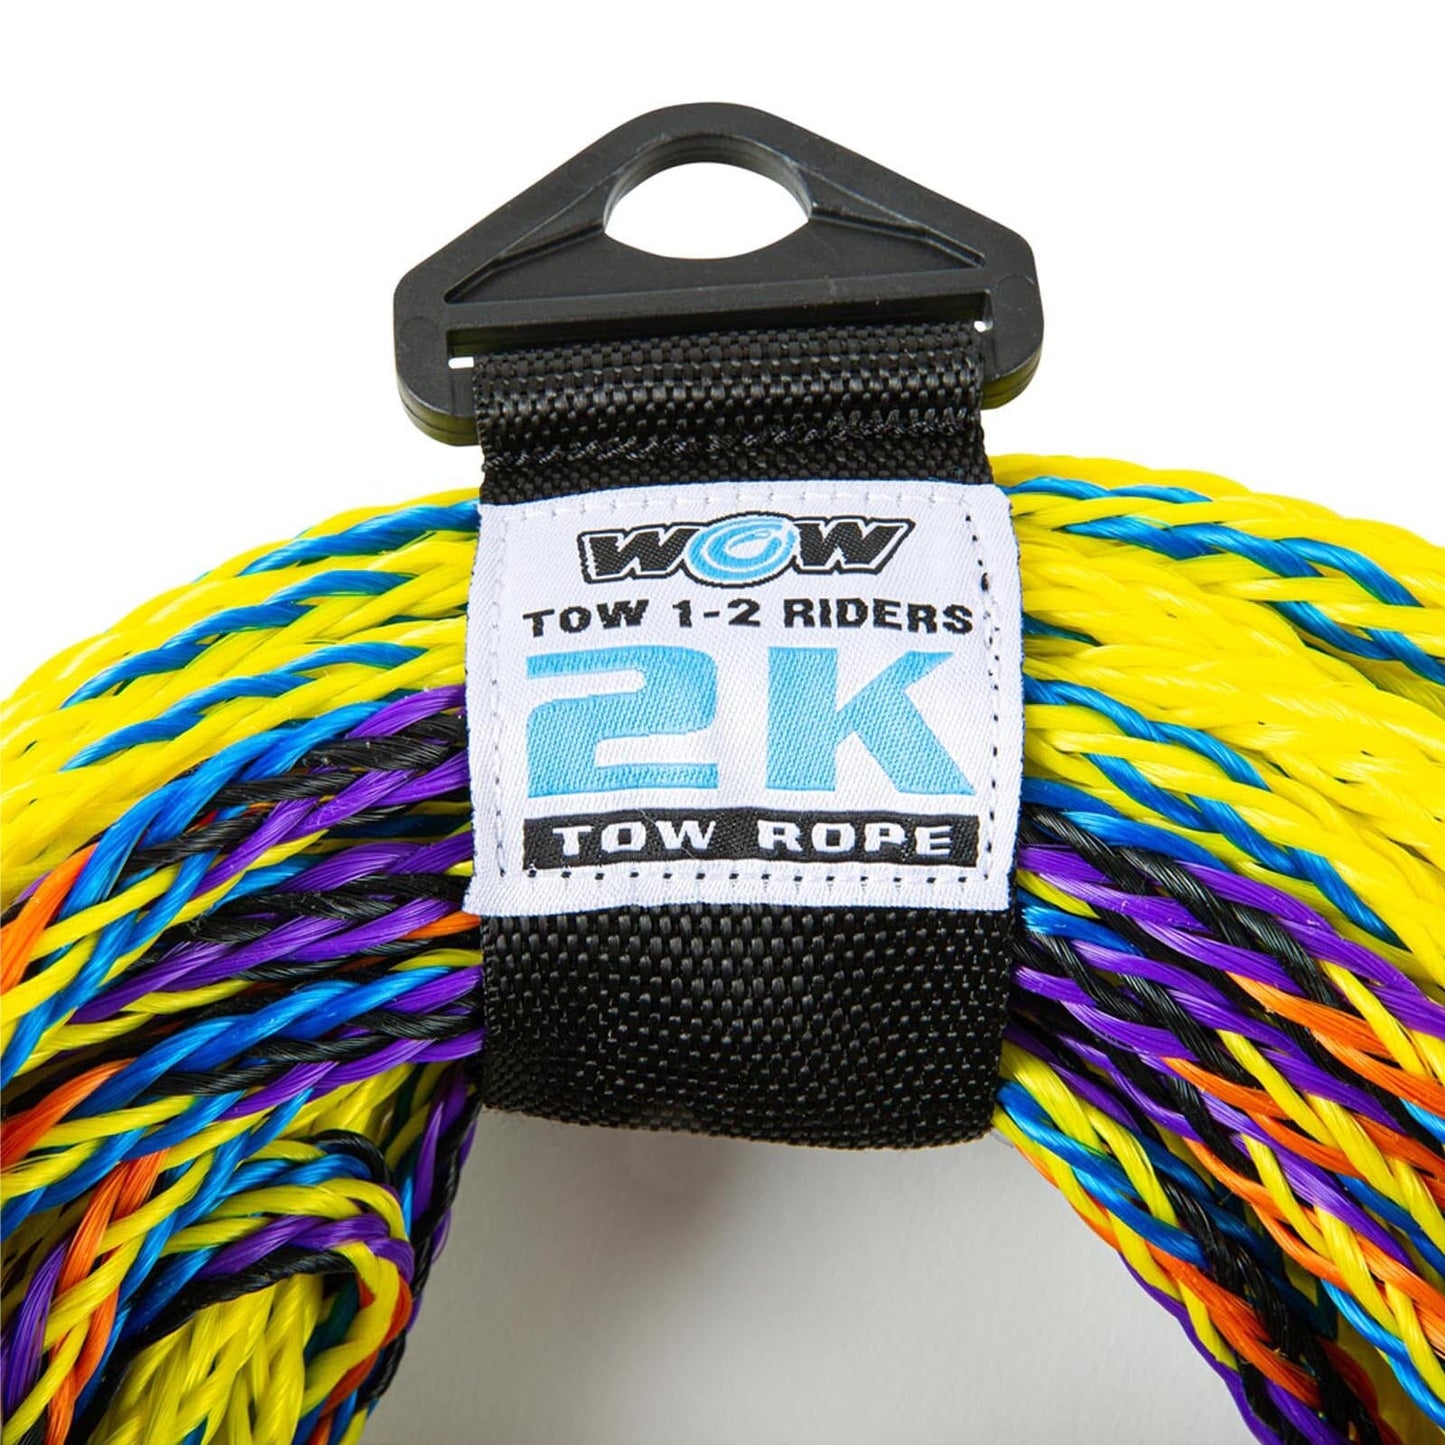 60' Tow 2-rider 2K tow rope with 2 sections